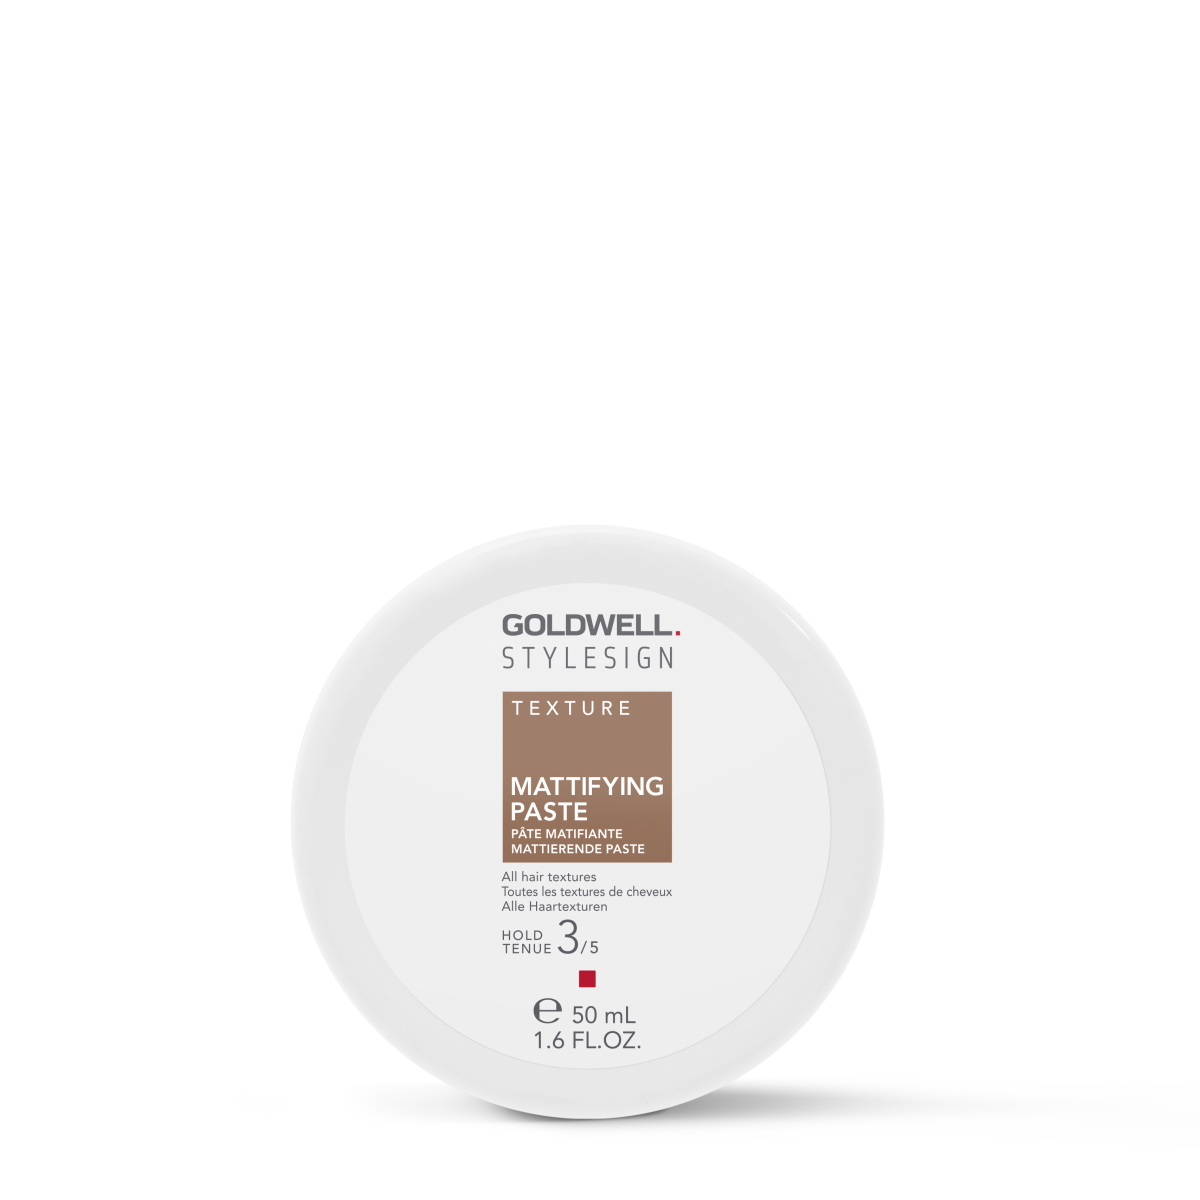 Goldwell Style Sign Texture Mattifying Paste 50ml